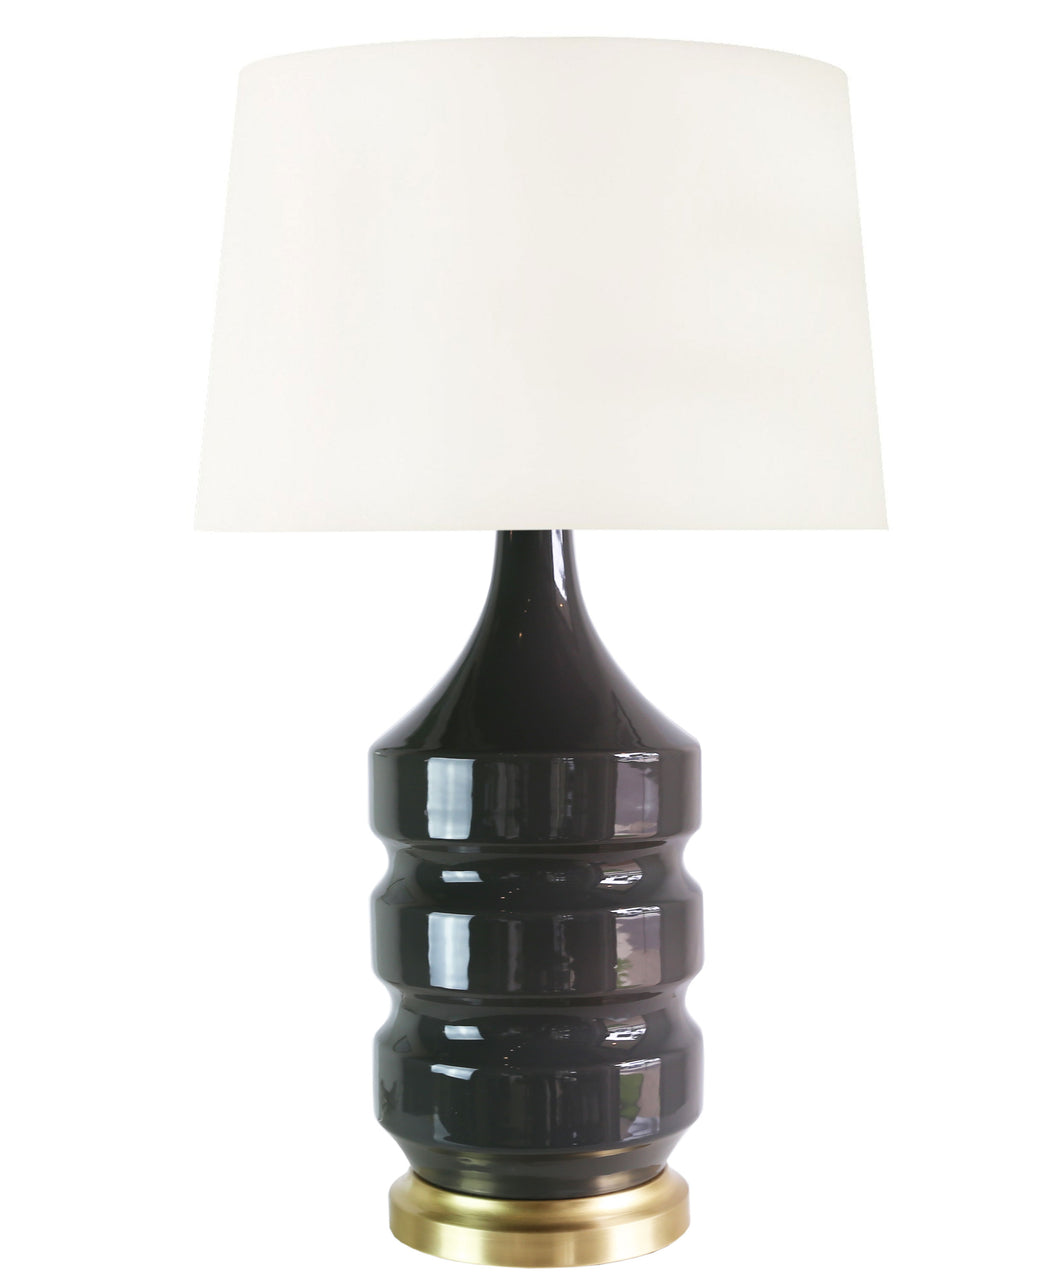 Thompson Table Lamp, Charcoal